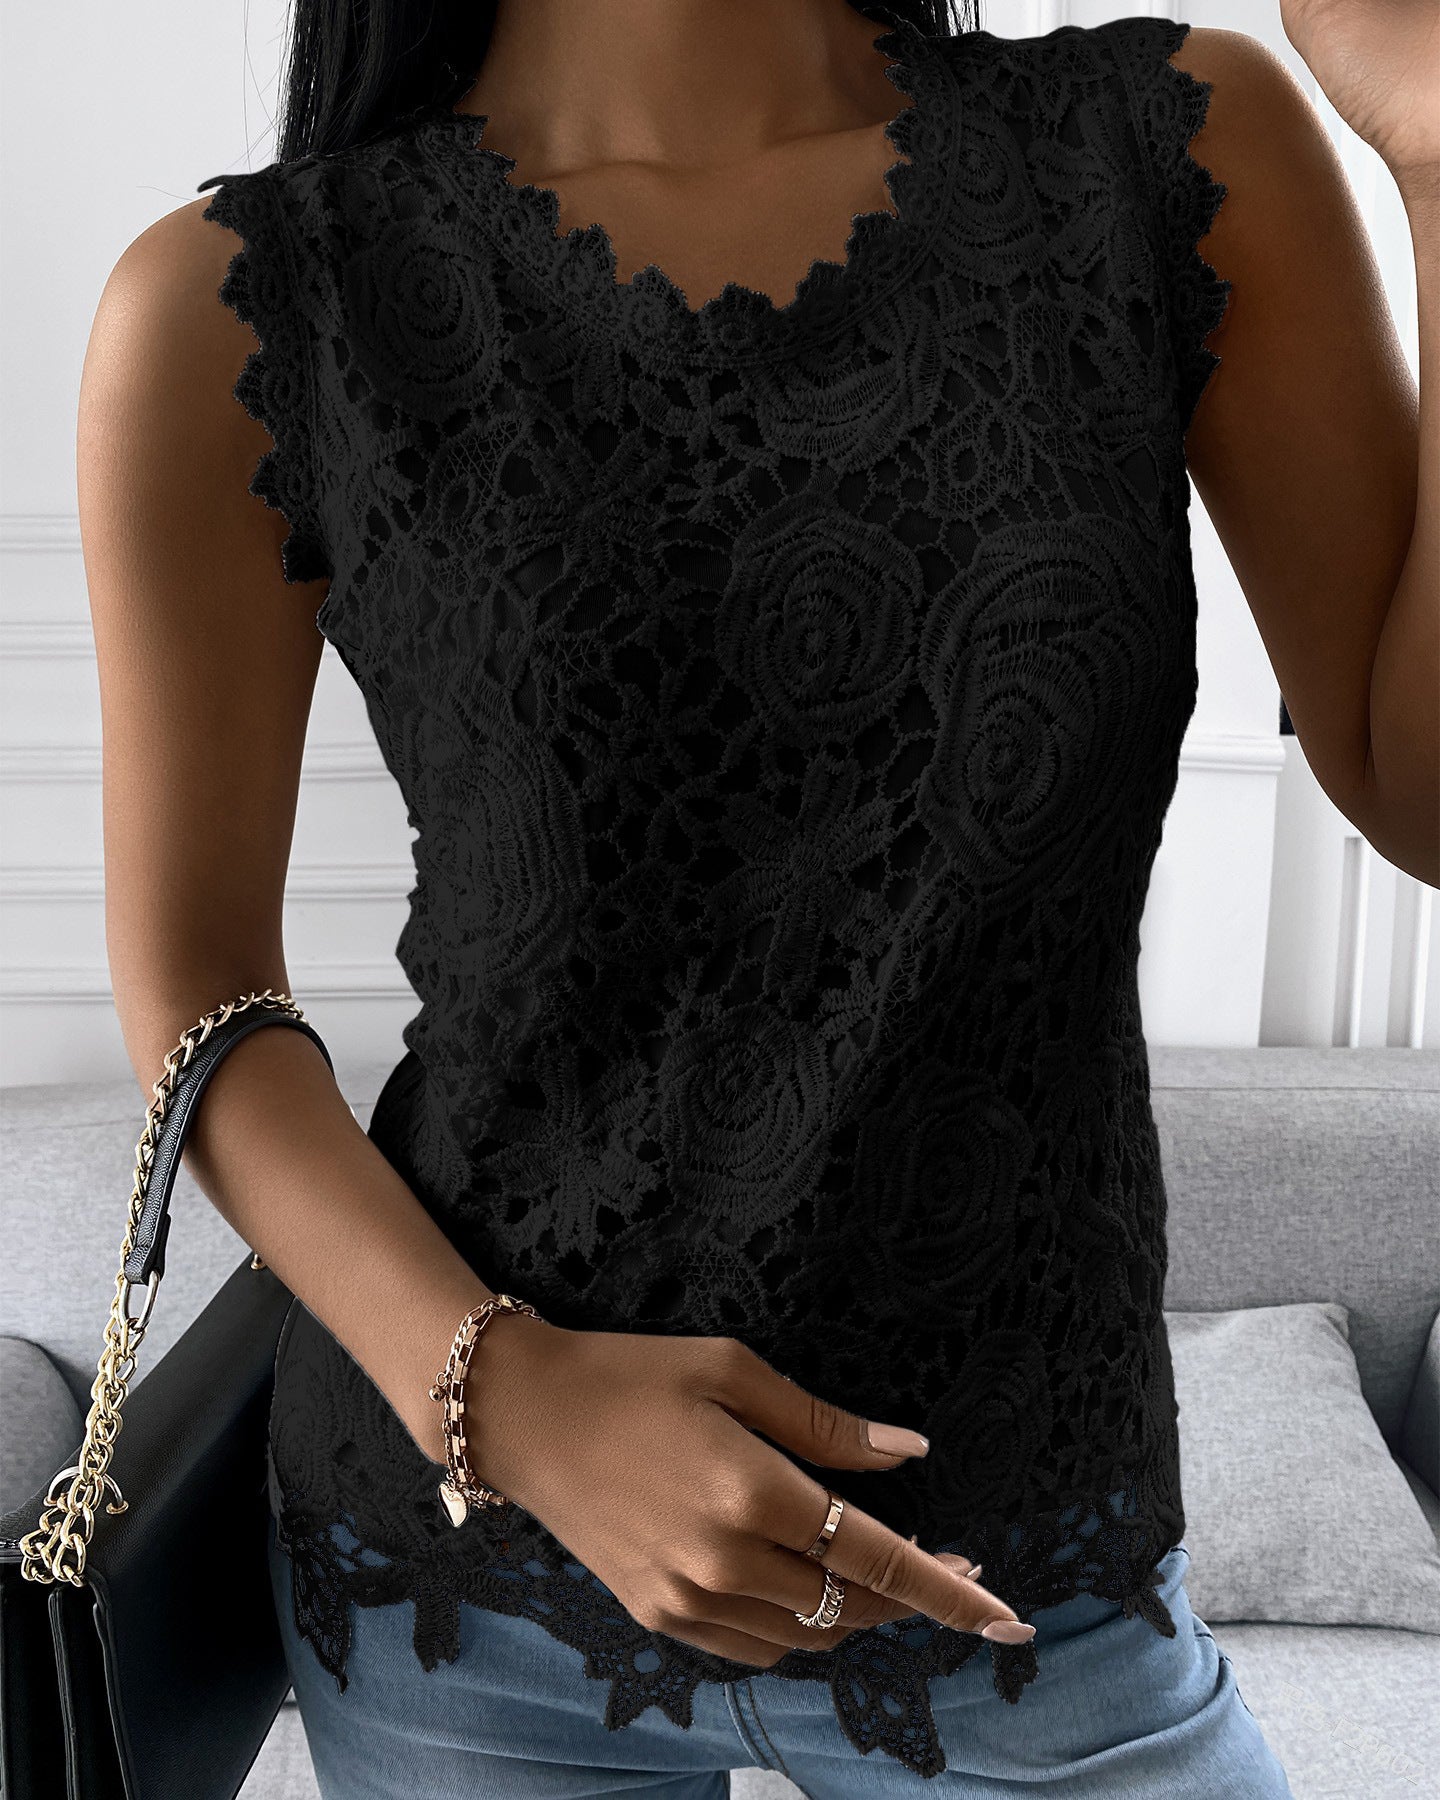 U-neck Sleeveless Solid Color Casual Lace T-shirt